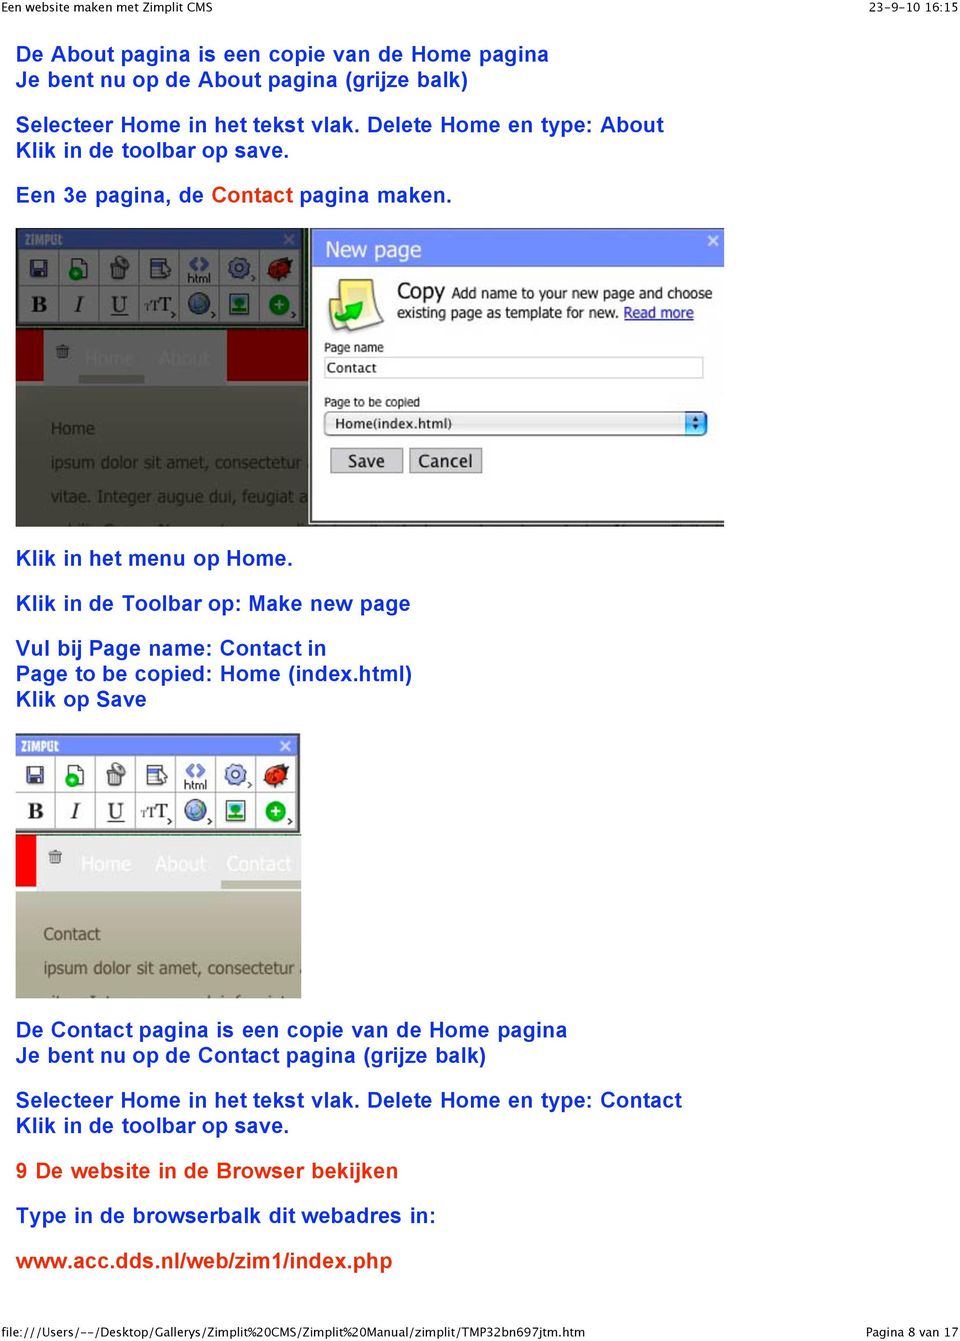 Klik in de Toolbar op: Make new page Vul bij Page name: Contact in Page to be copied: Home (index.